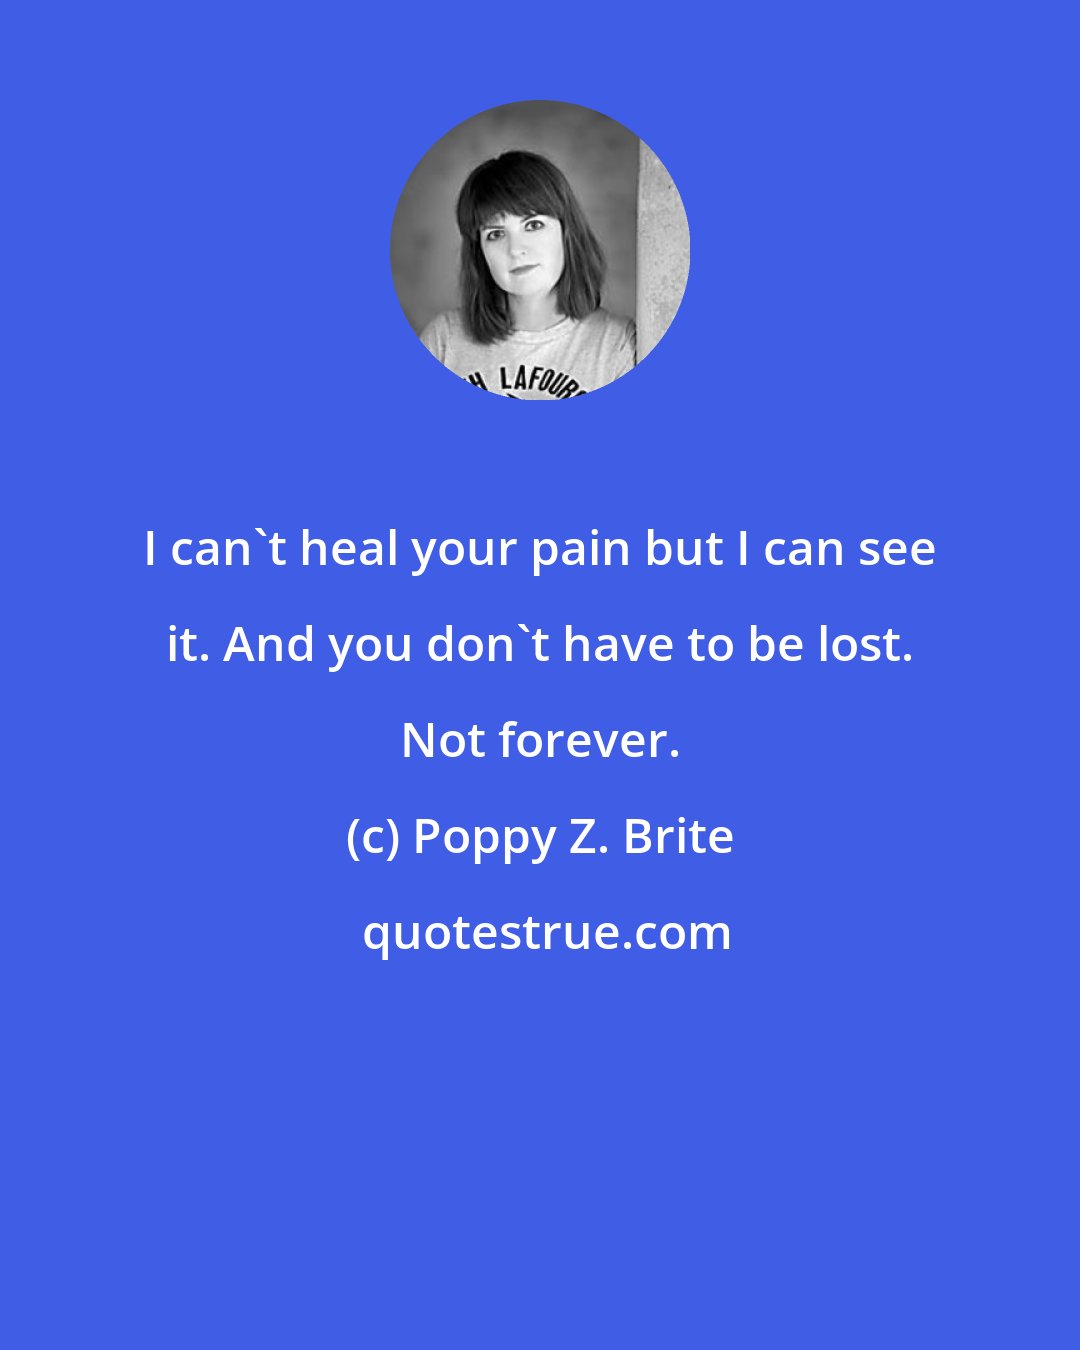 Poppy Z. Brite: I can't heal your pain but I can see it. And you don't have to be lost. Not forever.